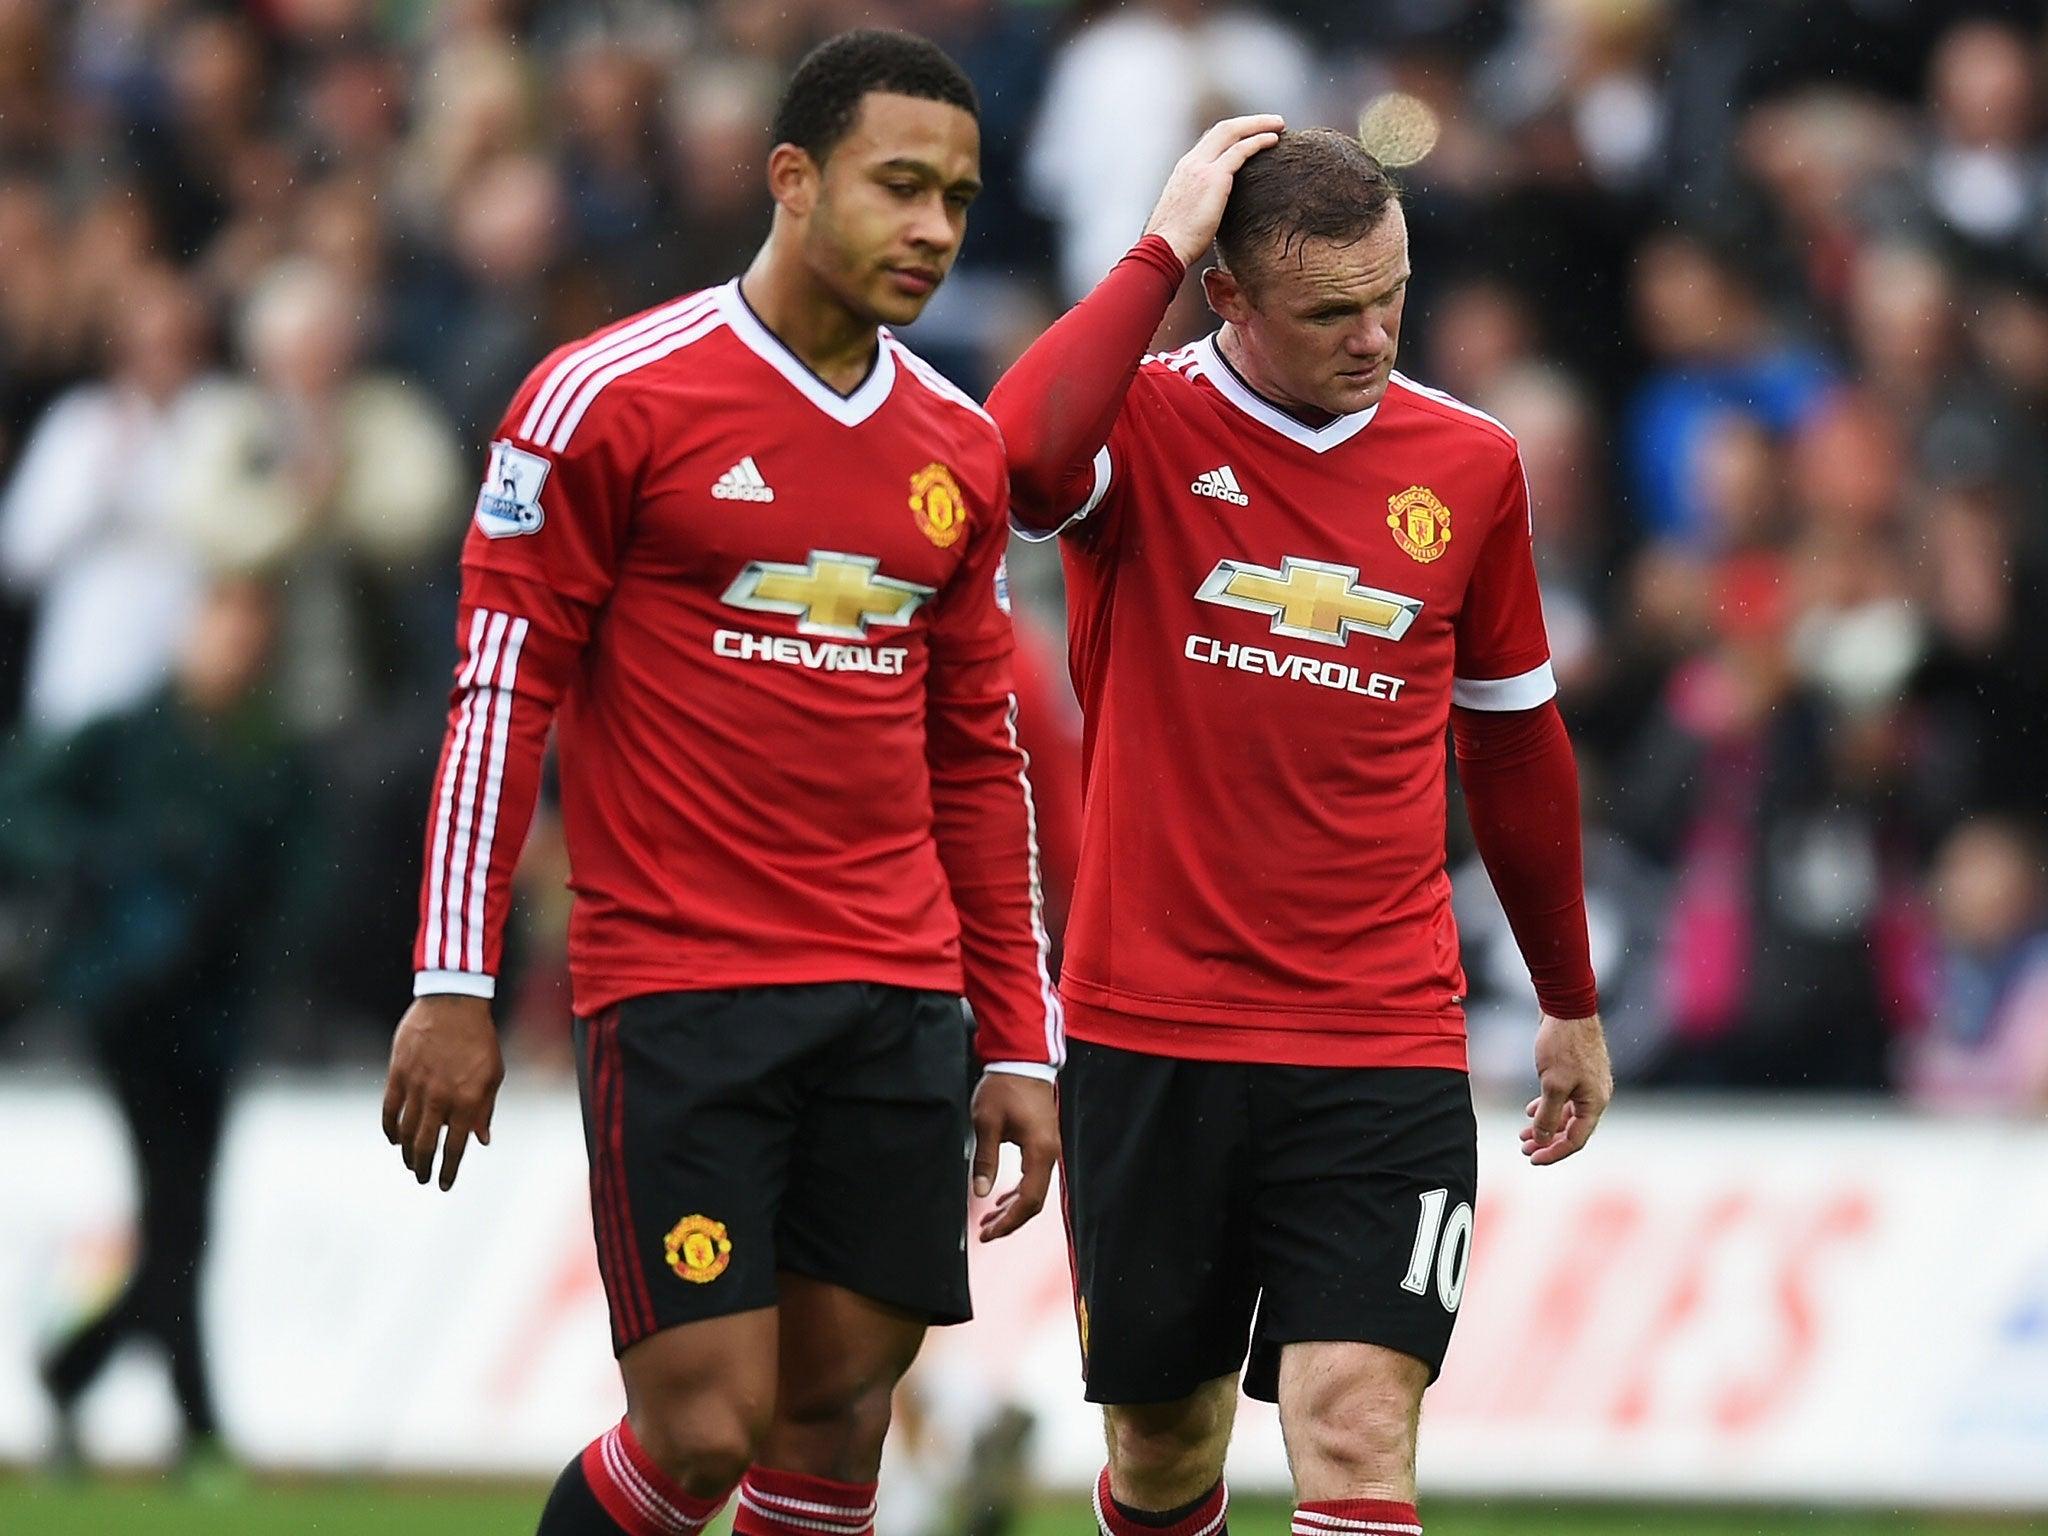 Wayne Rooney has been ruled out of Manchester United's clash with Liverpool